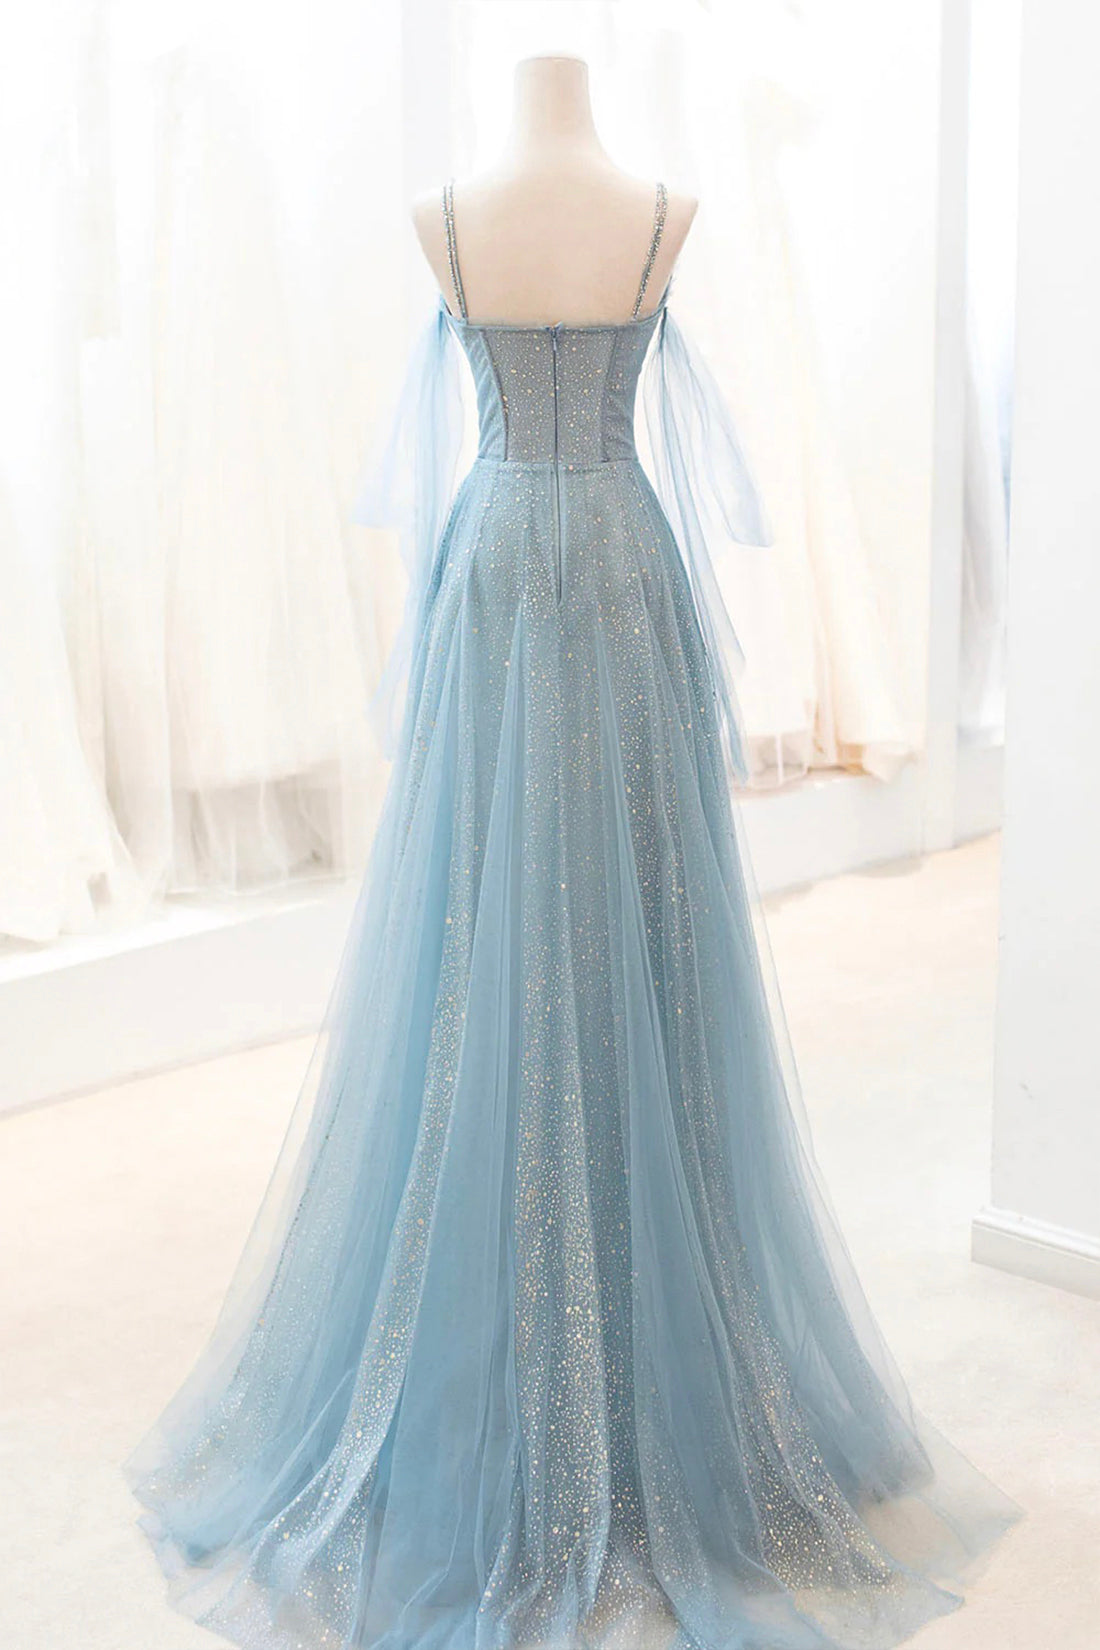 Kathryn | Dusty Blue Sparkly Tulle Long Prom Dress, A-Line Spaghetti Strap Evening Dress